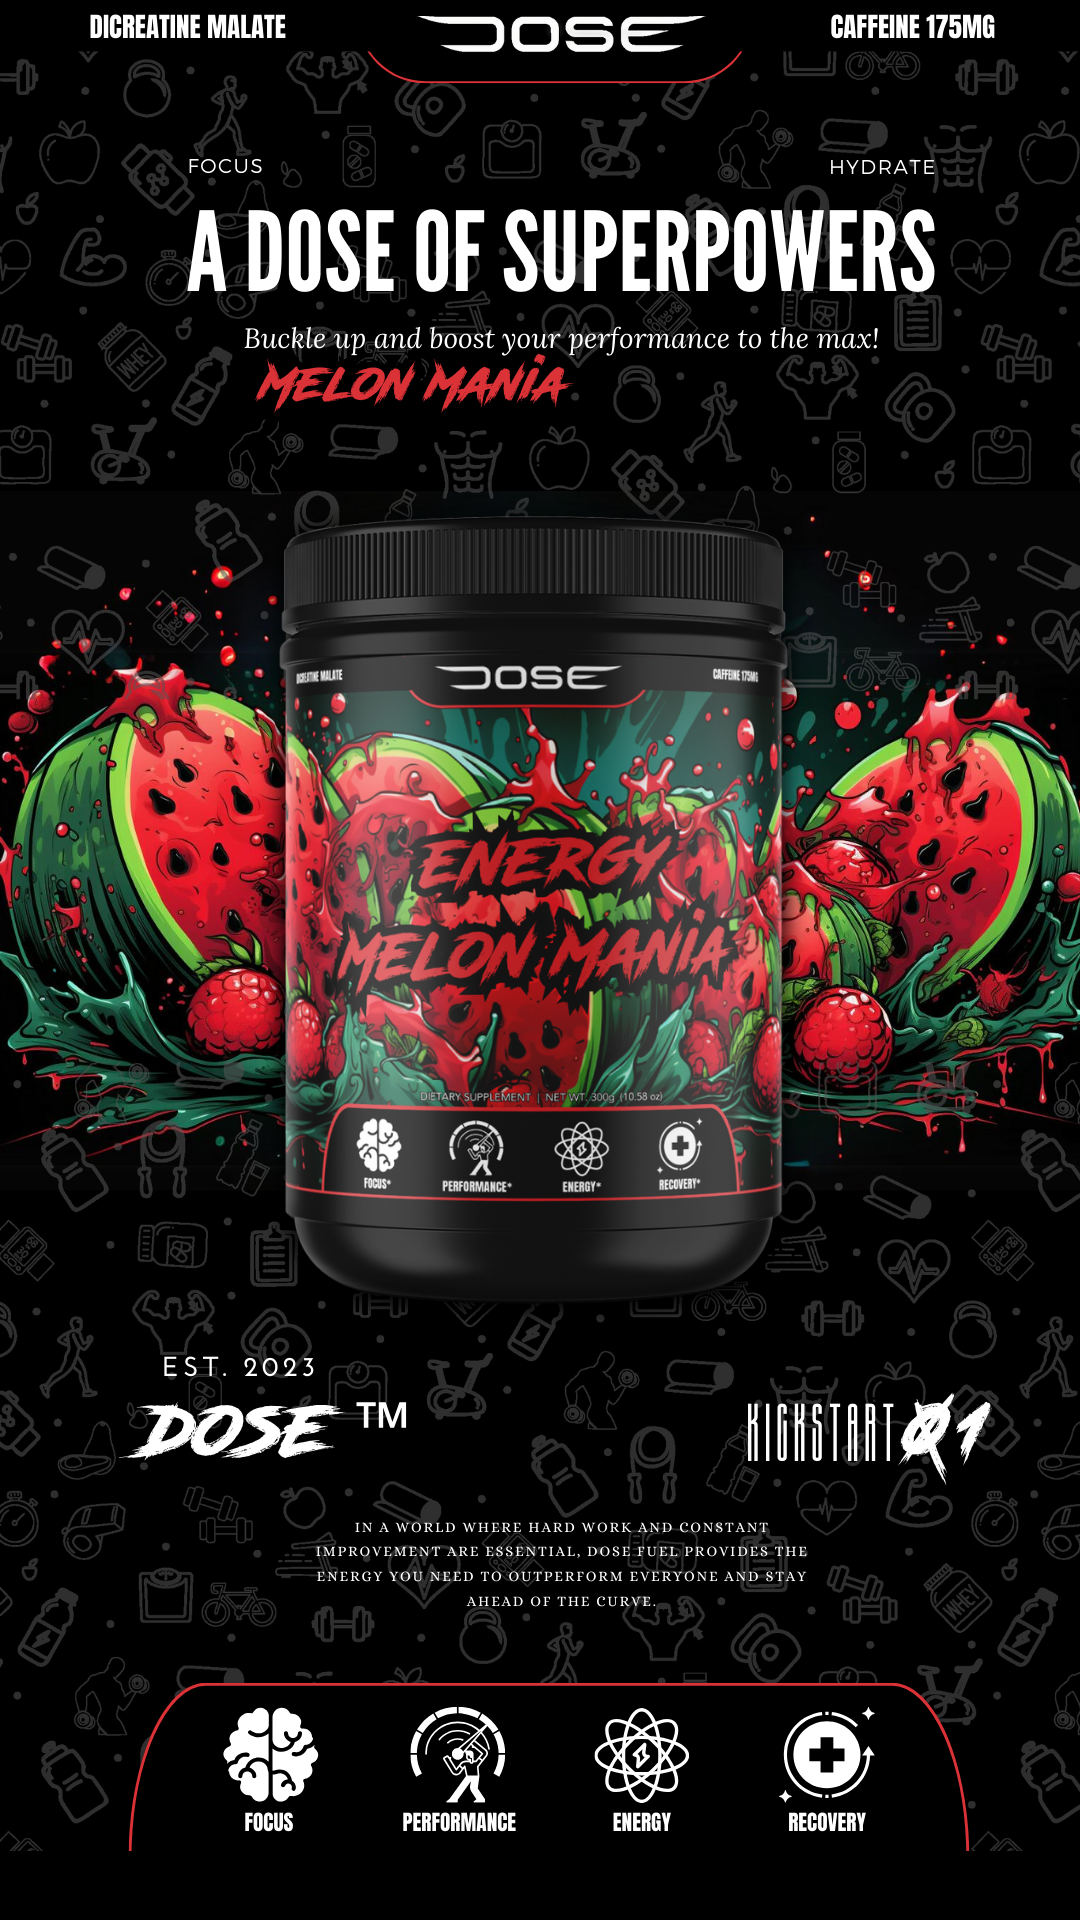 Dose Fuel Energy Melon Mania Pre-Workout Supplement - A Dose of Superpowers, 1500mg Dicreatine Malate, 175mg Caffeine, Boost Performance, Focus, Energy, and Recovery